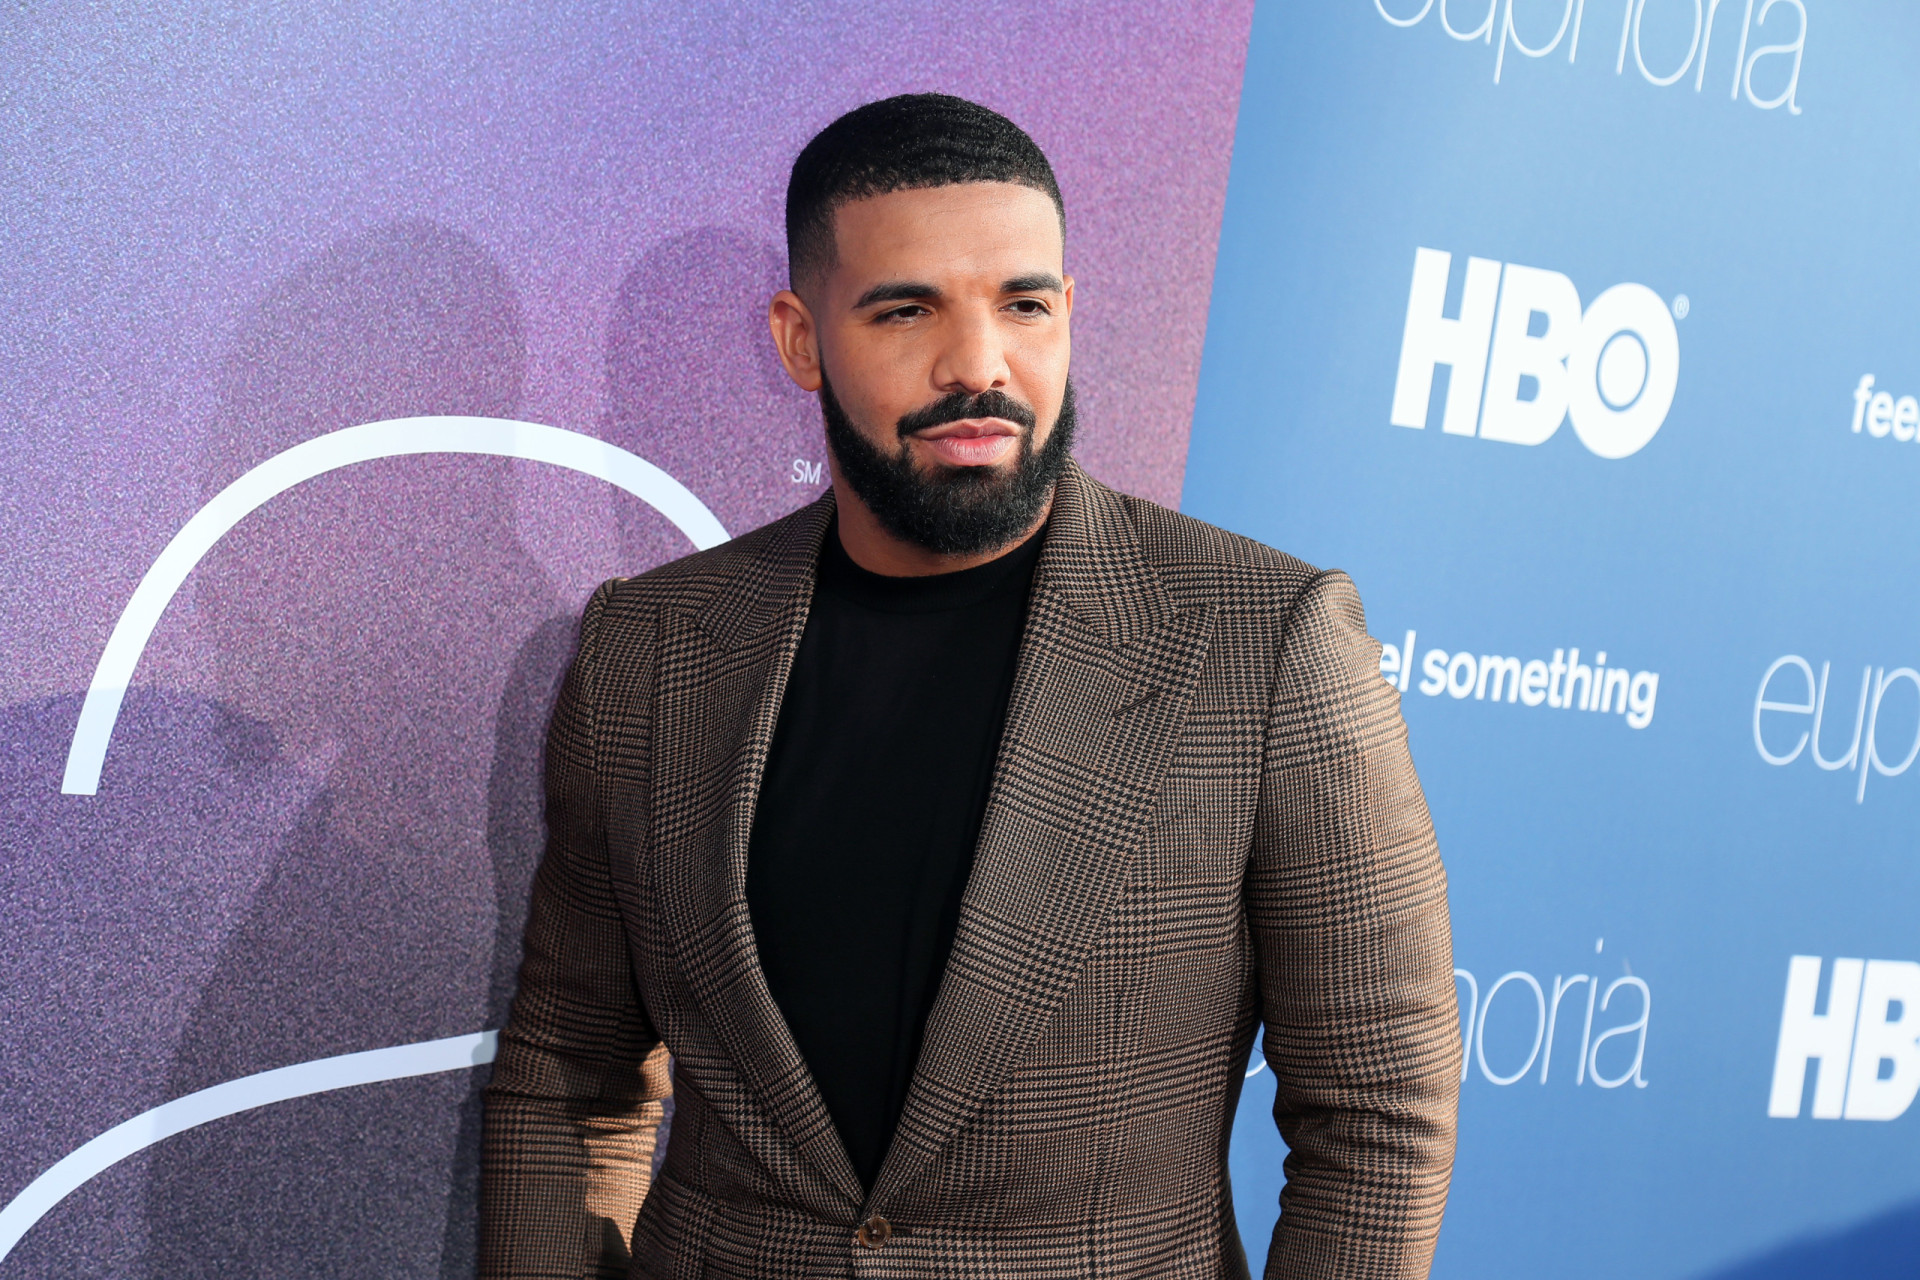 <p>With Scorpio in his birth chart, Drake's tarot reading captures his intense lyrical prowess and emotional resonance.</p><p><a href="https://www.msn.com/en-us/community/channel/vid-7xx8mnucu55yw63we9va2gwr7uihbxwc68fxqp25x6tg4ftibpra?cvid=94631541bc0f4f89bfd59158d696ad7e">Follow us and access great exclusive content every day</a></p>